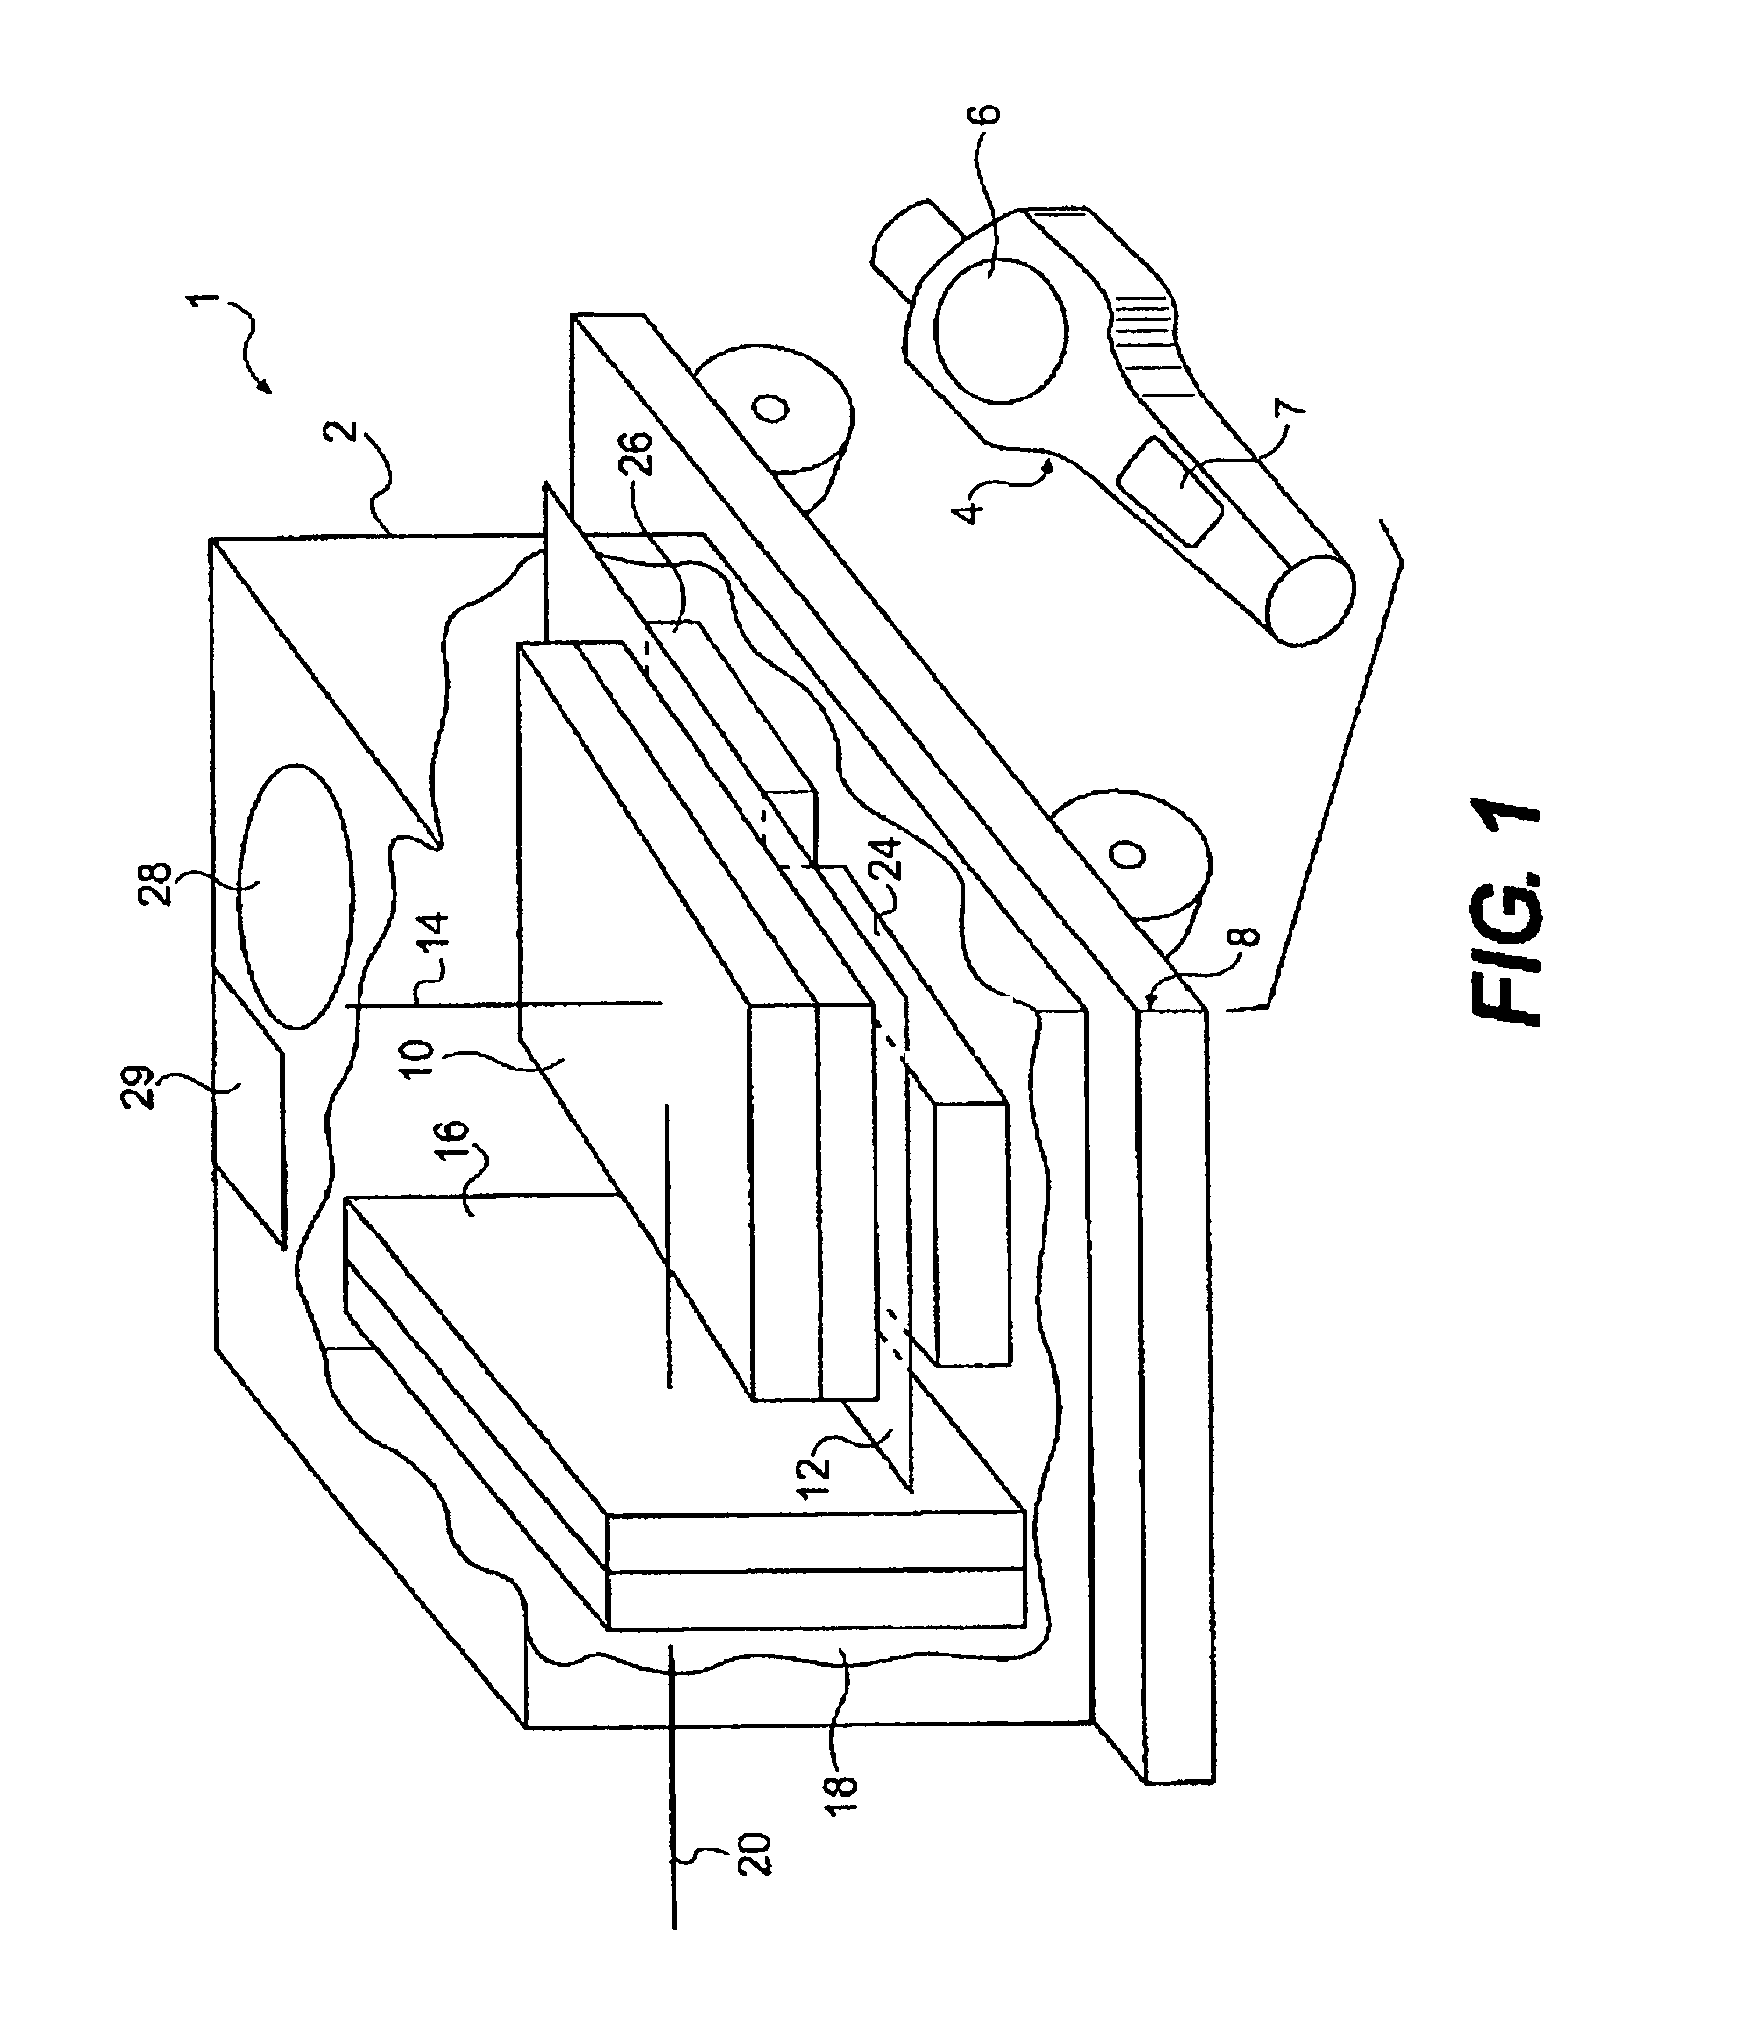 Apparatus and method for detection, location, and identification of gamma sources